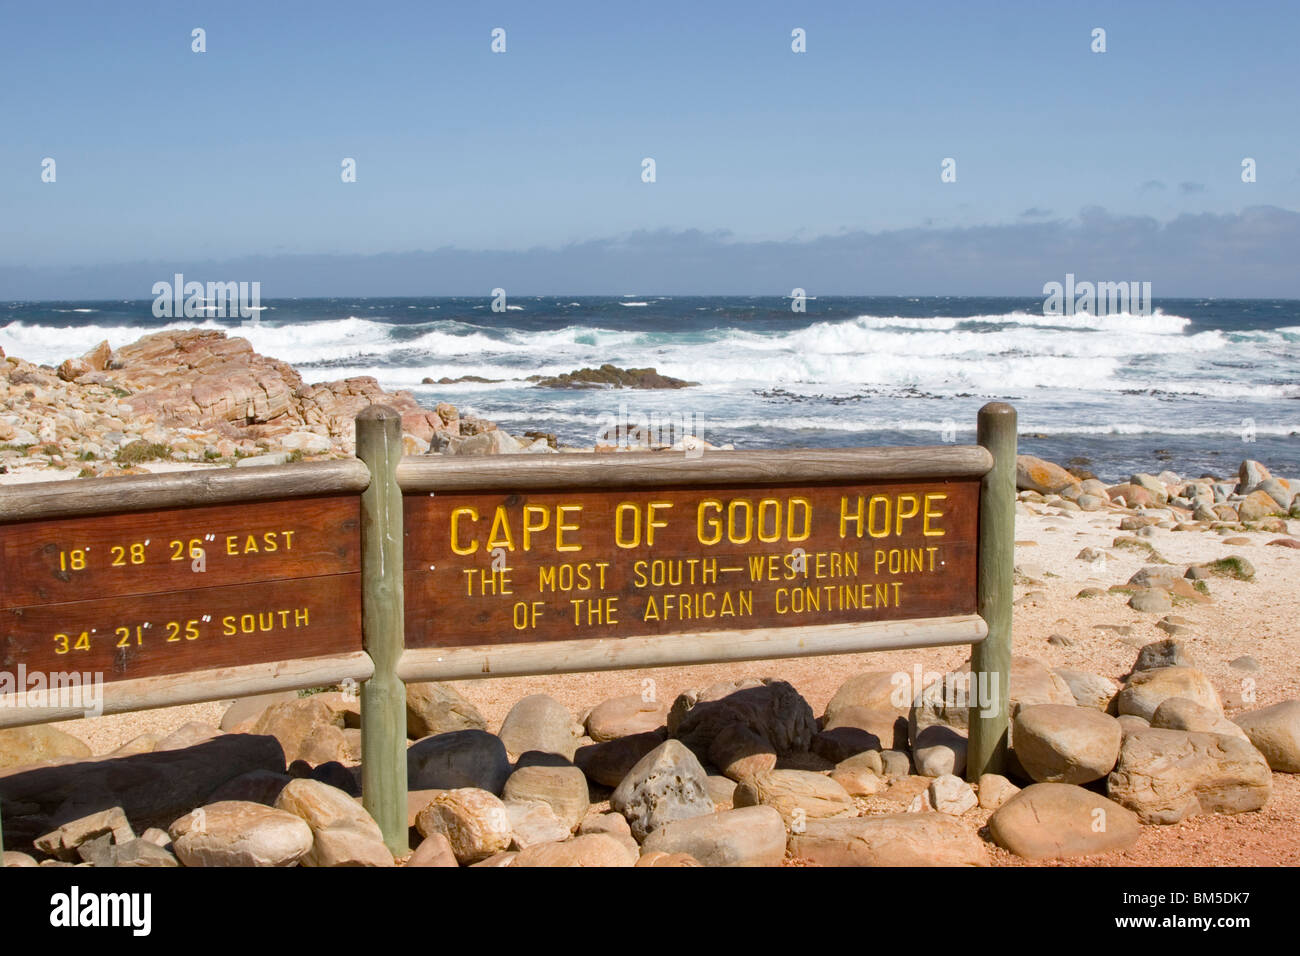 Cape of good hope, South Africa Stock Photo